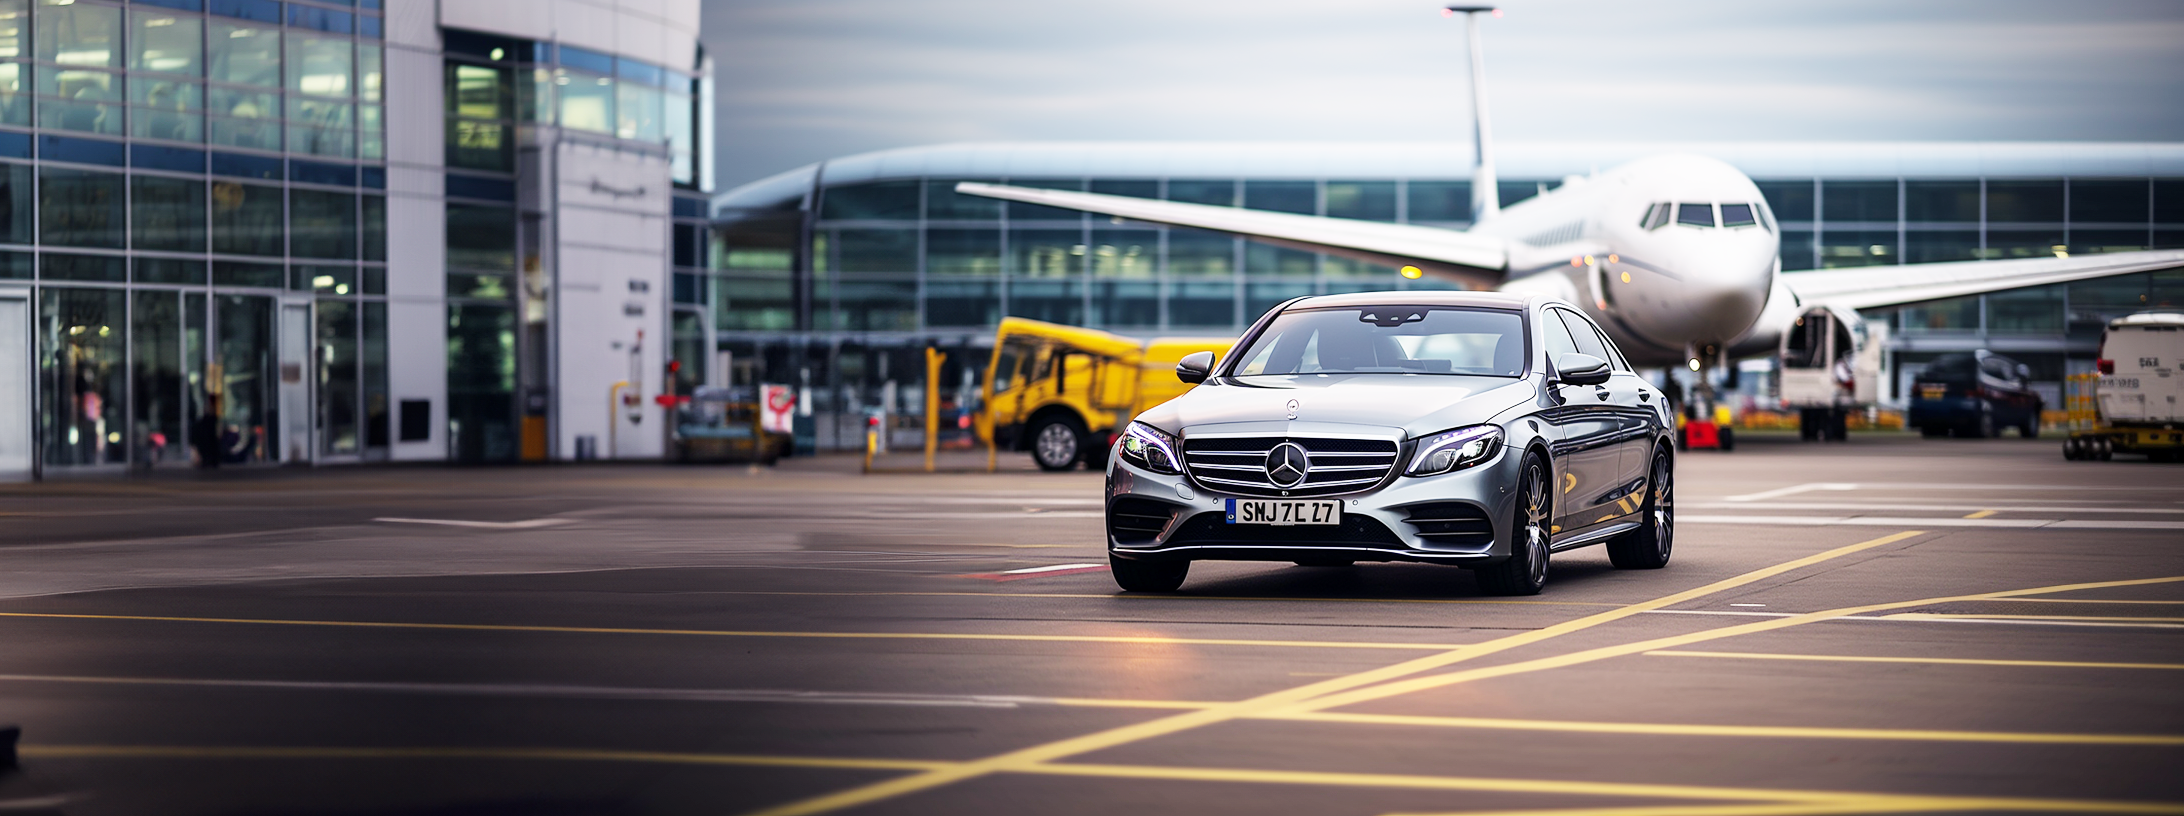 Private Hire car from YourCarsAndover in front of London Heathrow Airport.